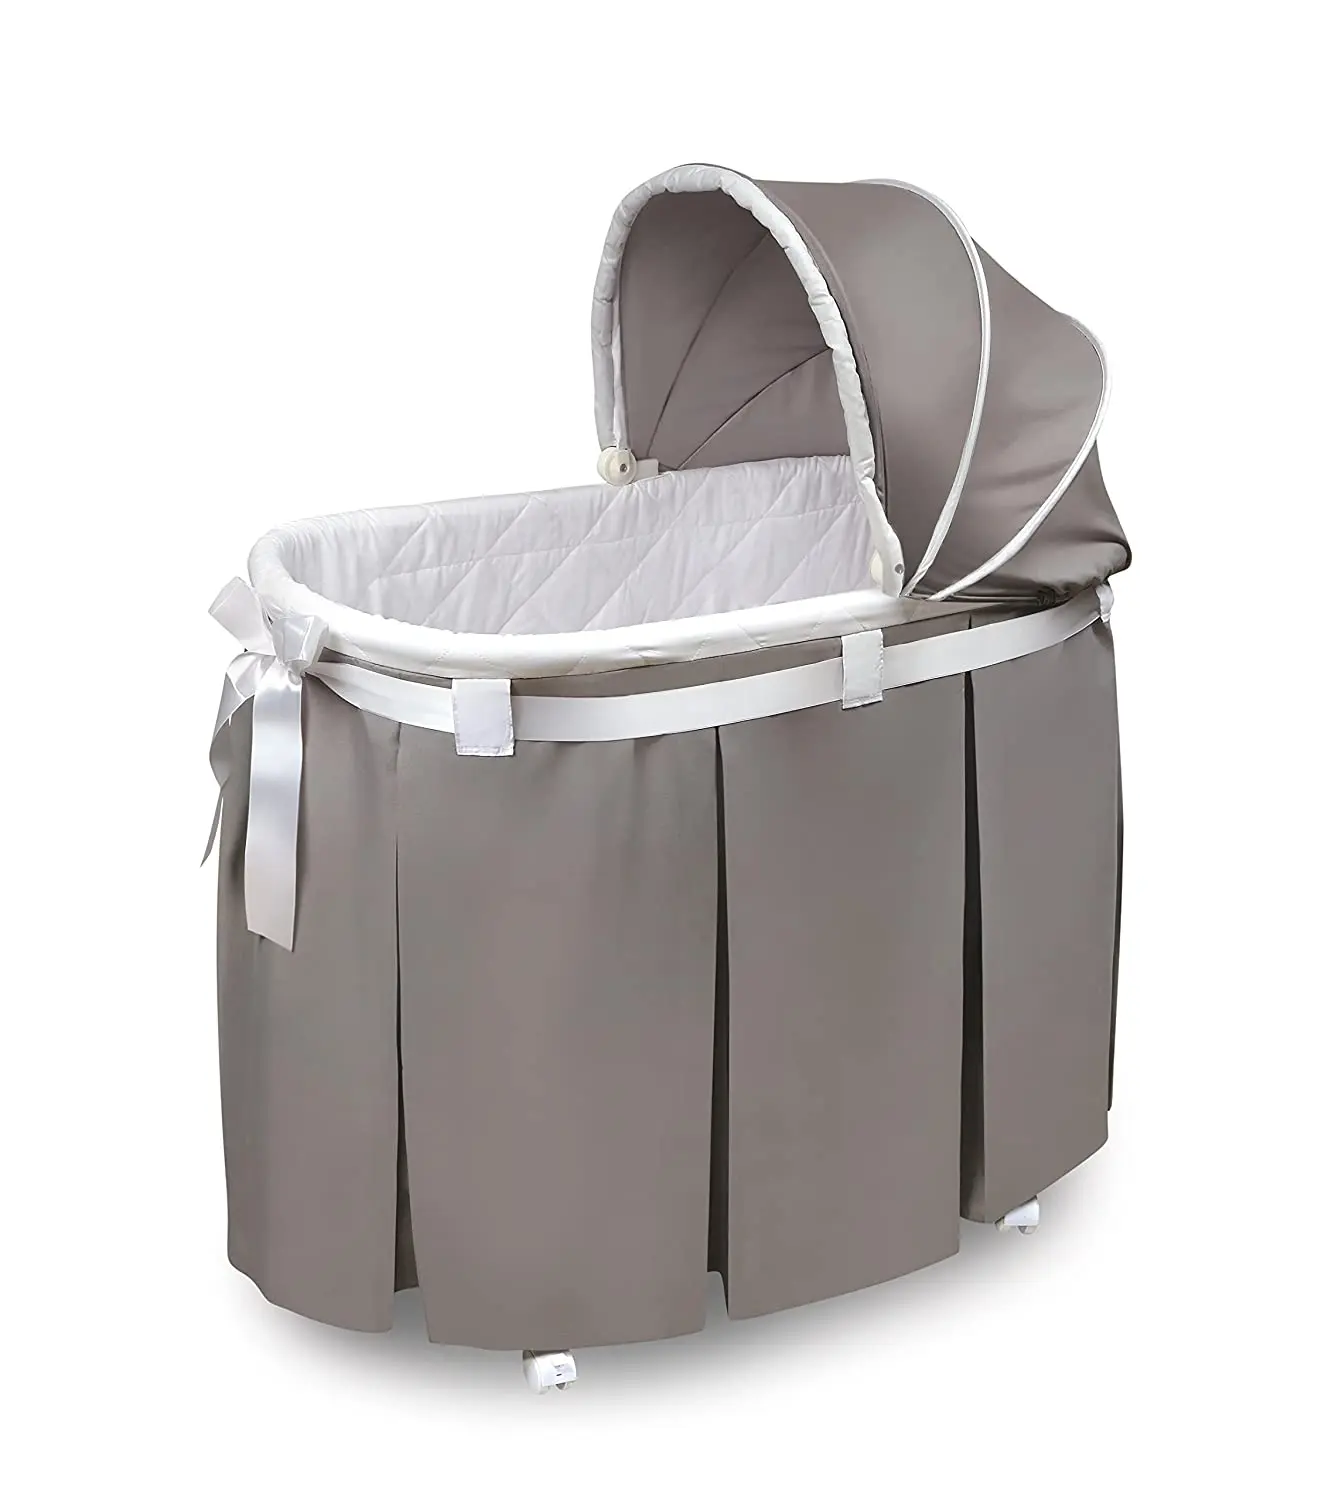 Wishes Oval Rocking Baby Bassinet With Bedding, Storage, And Pad